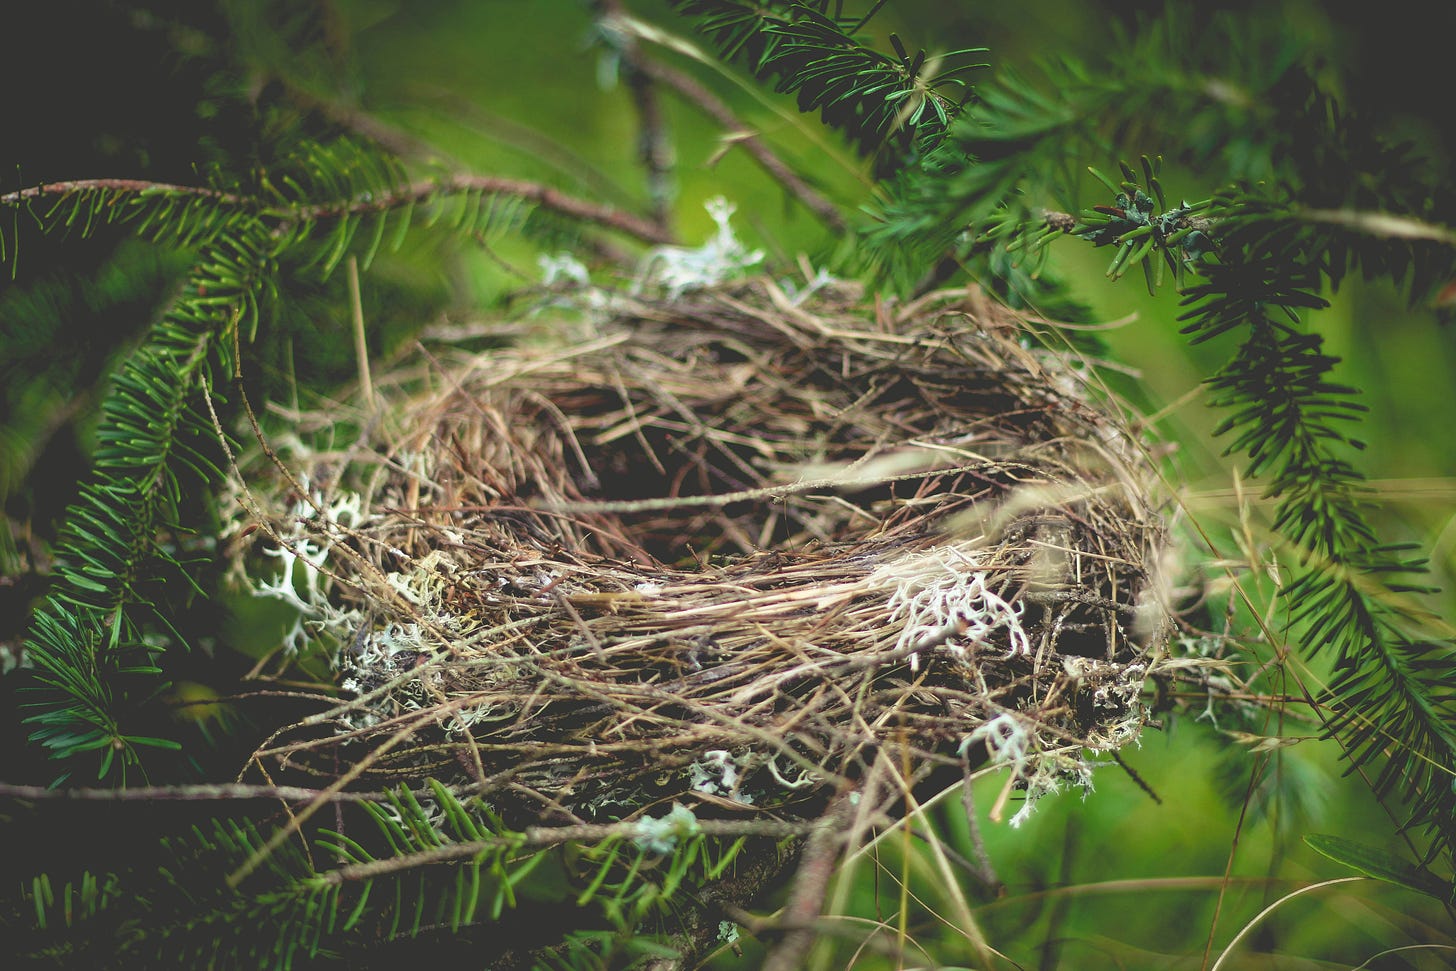 A nest sits empty in a tree